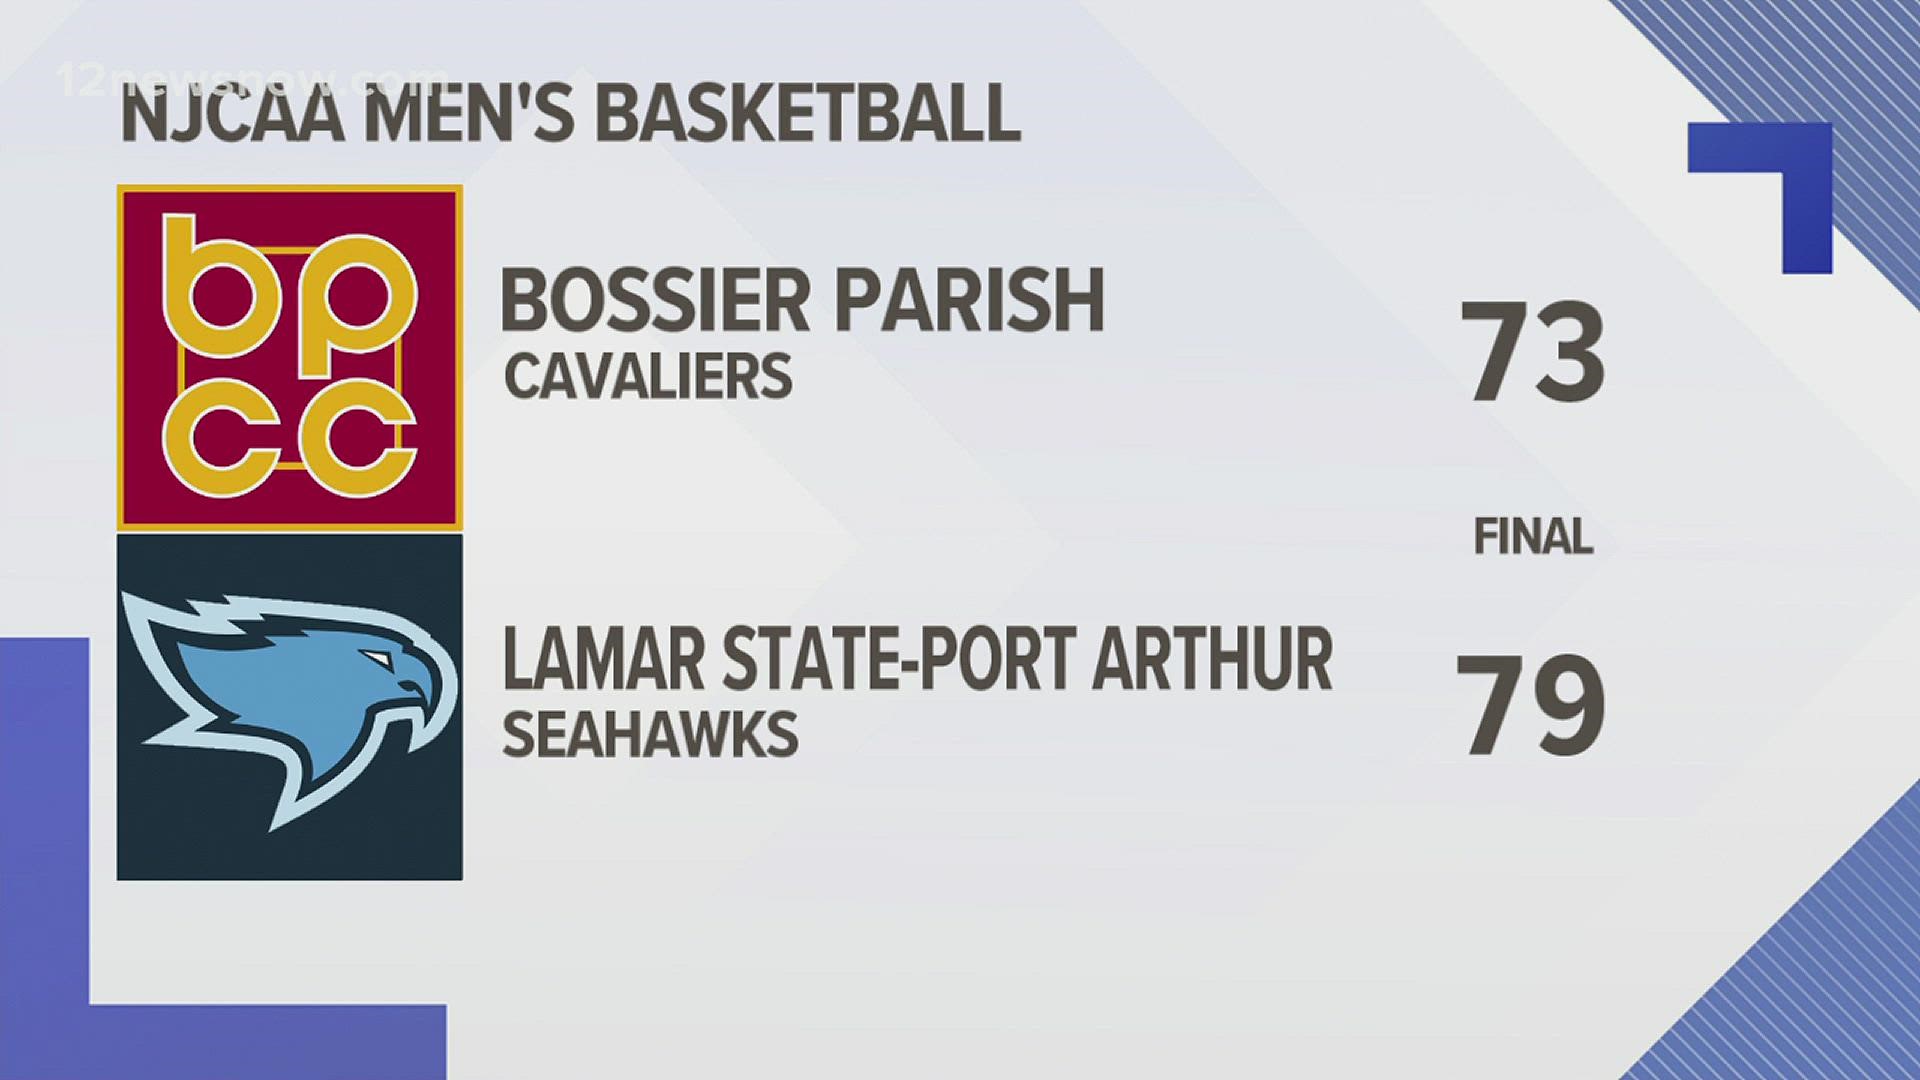 Lamar State Seahawks play the Bossier Parish Cavaliers after suffering a road loss.